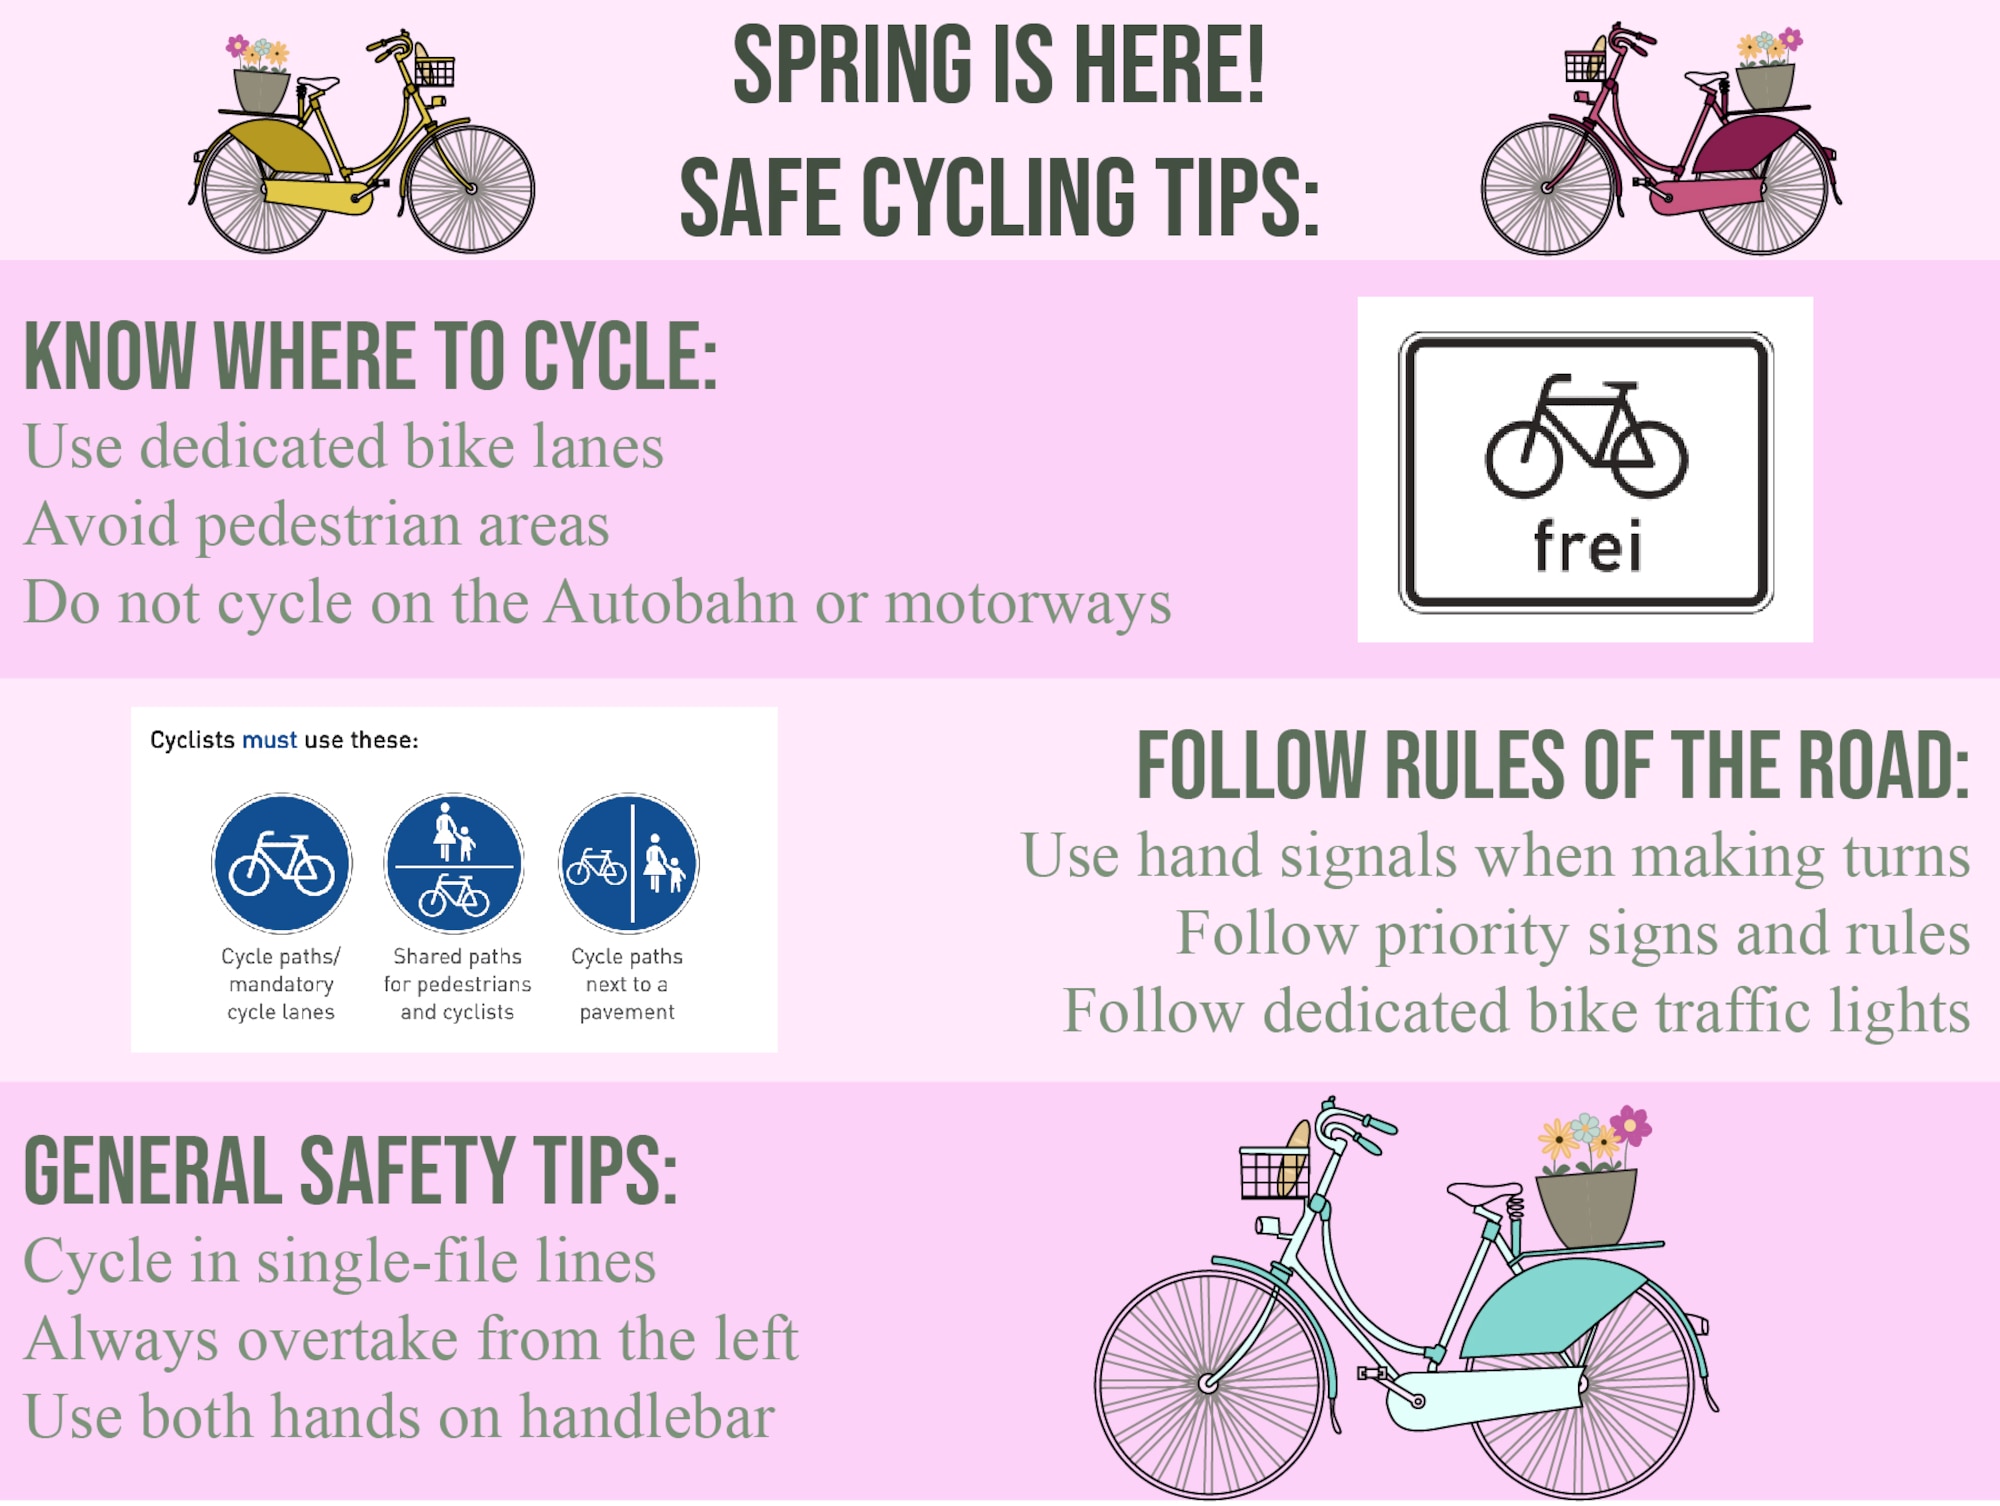 A pink colored graphic with green text and images of bicycles